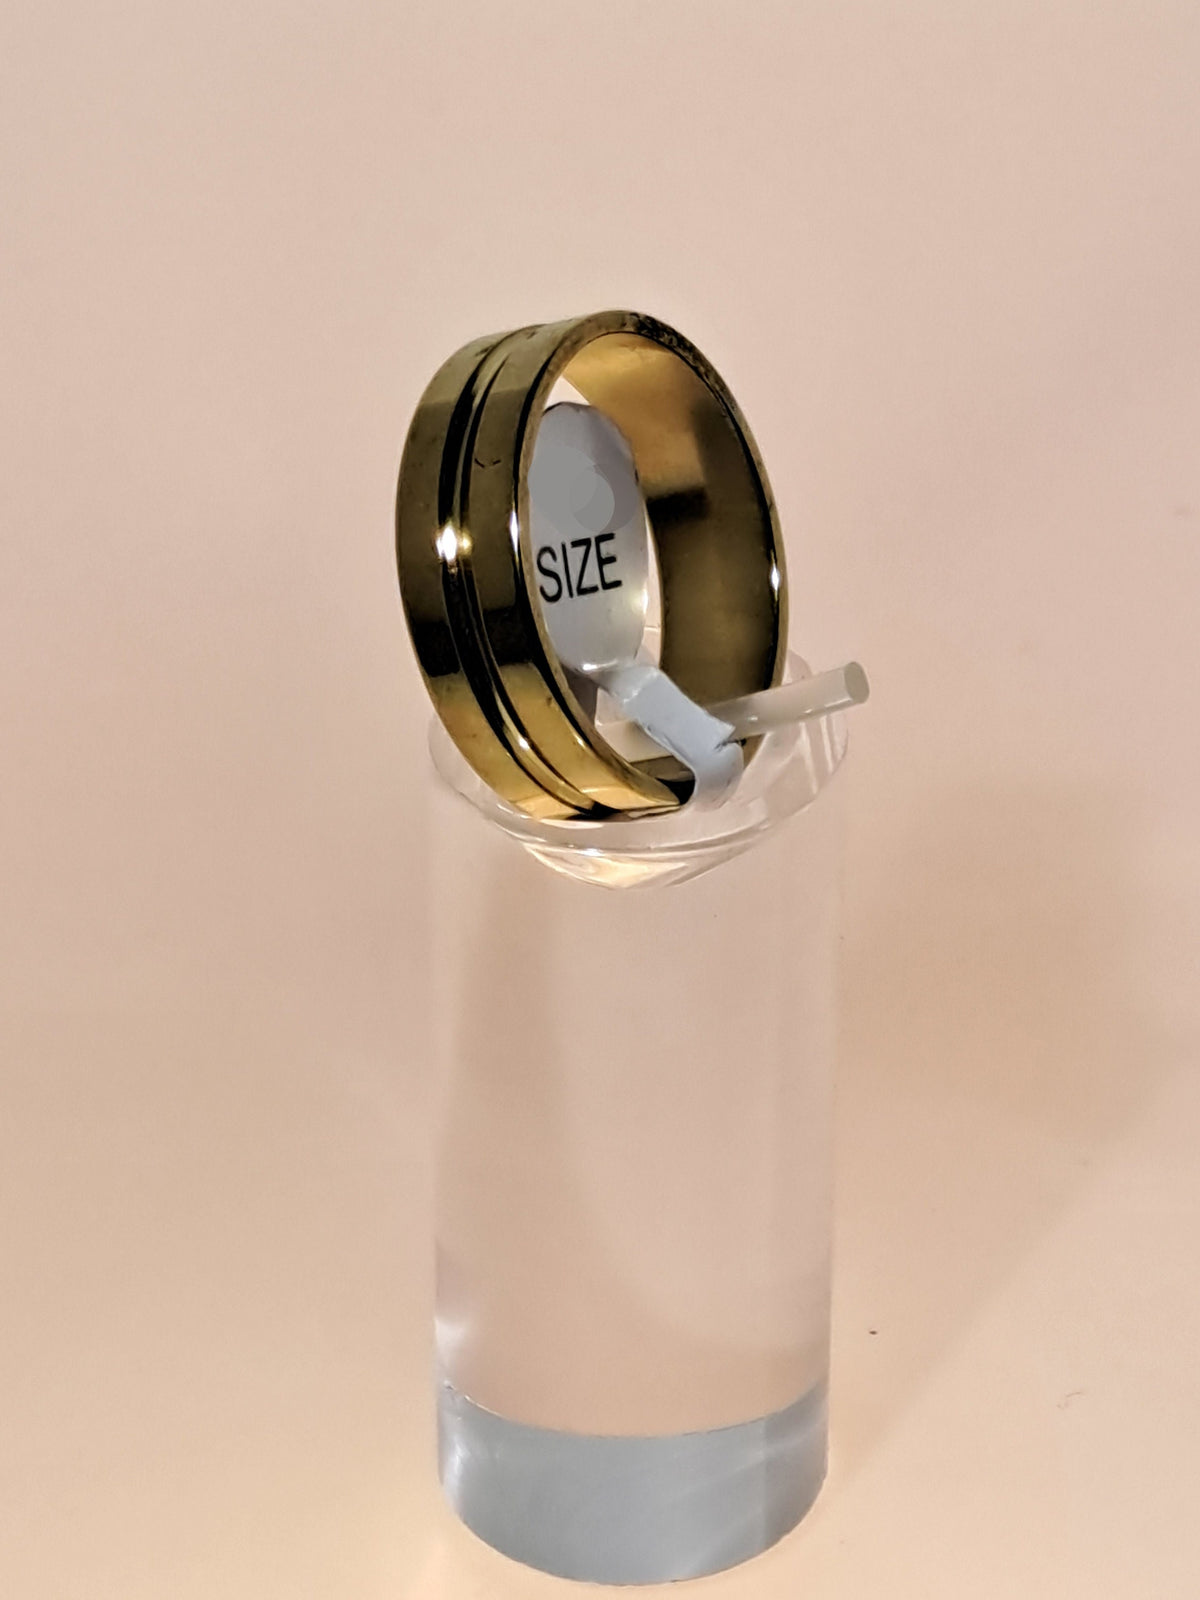 Gold stainless steel unisex ring with a rounded channel around the band. Perfect costume jewellery.